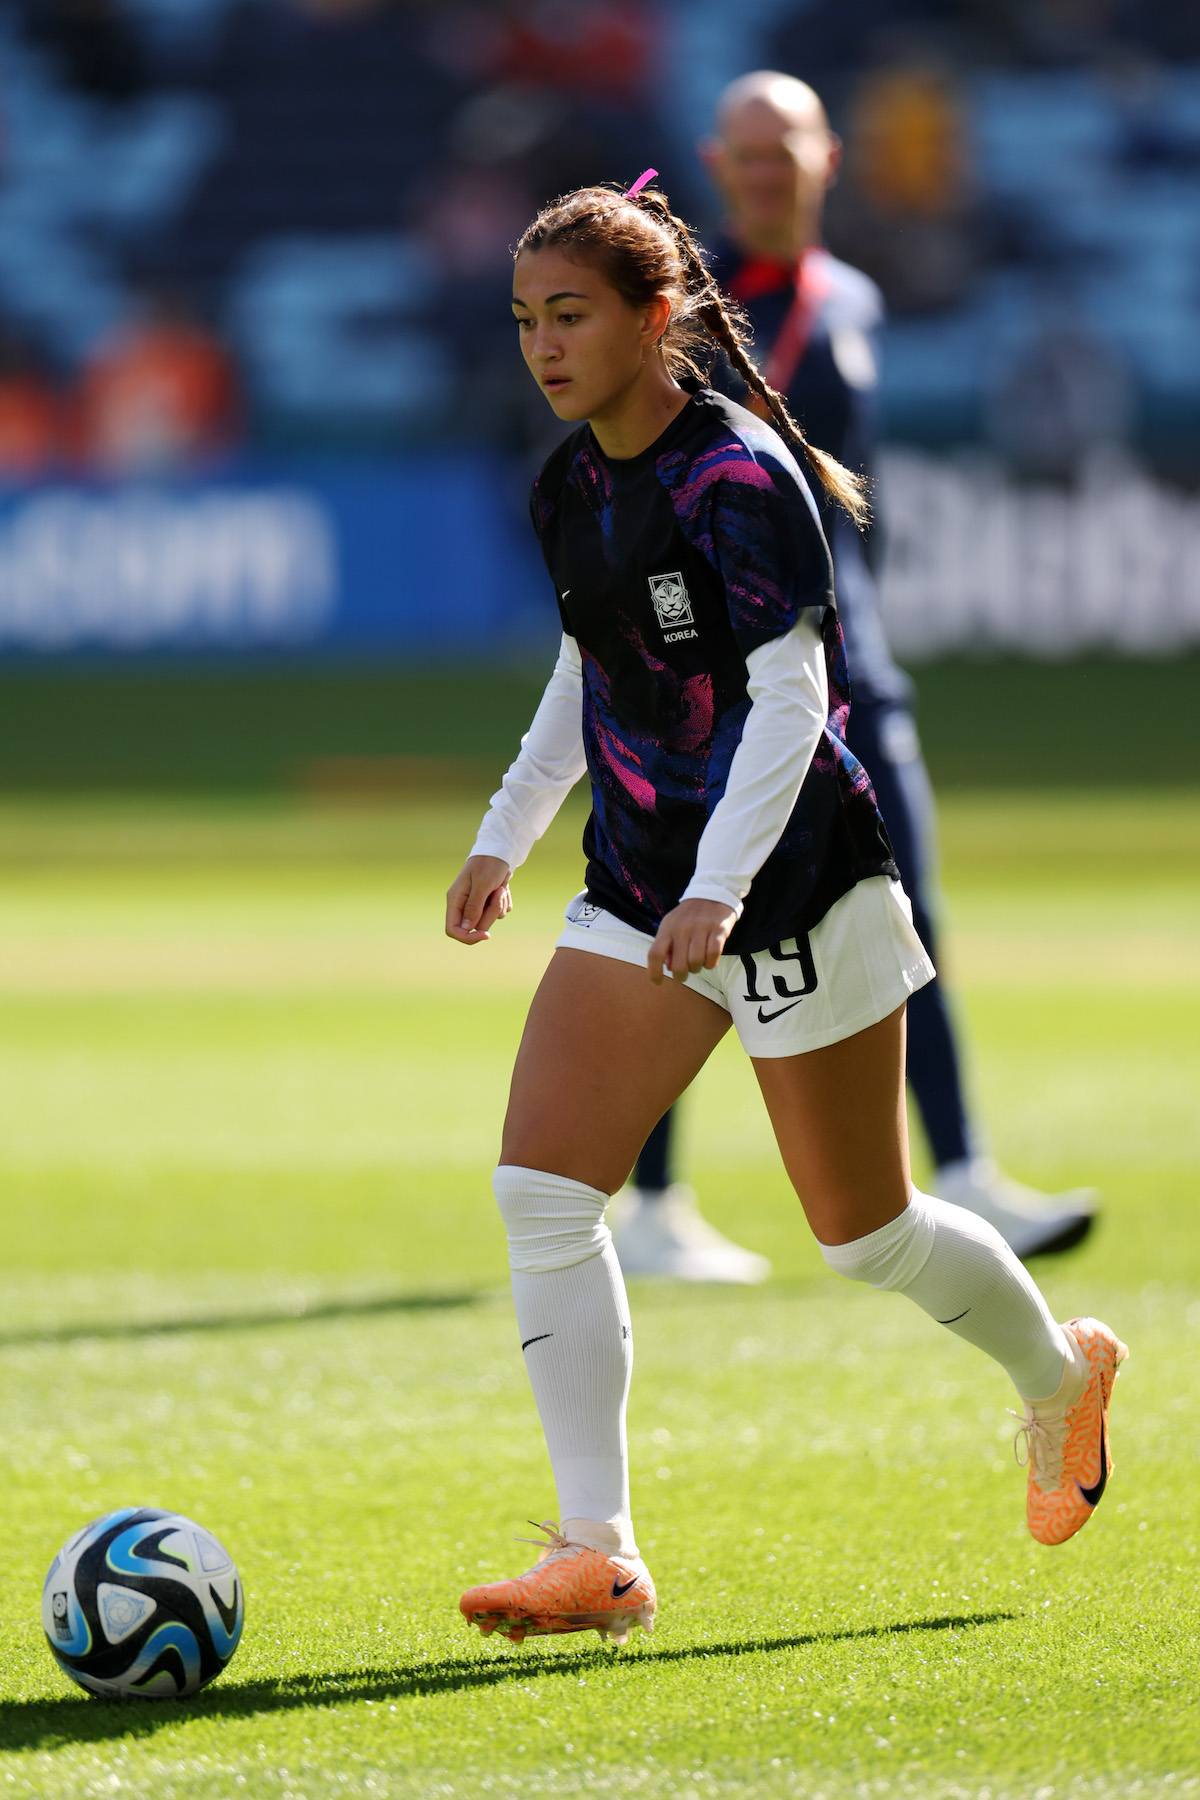 This 16-Year-Old South Korean Player Has Become The Youngest Person To Play At The Women’s World Cup